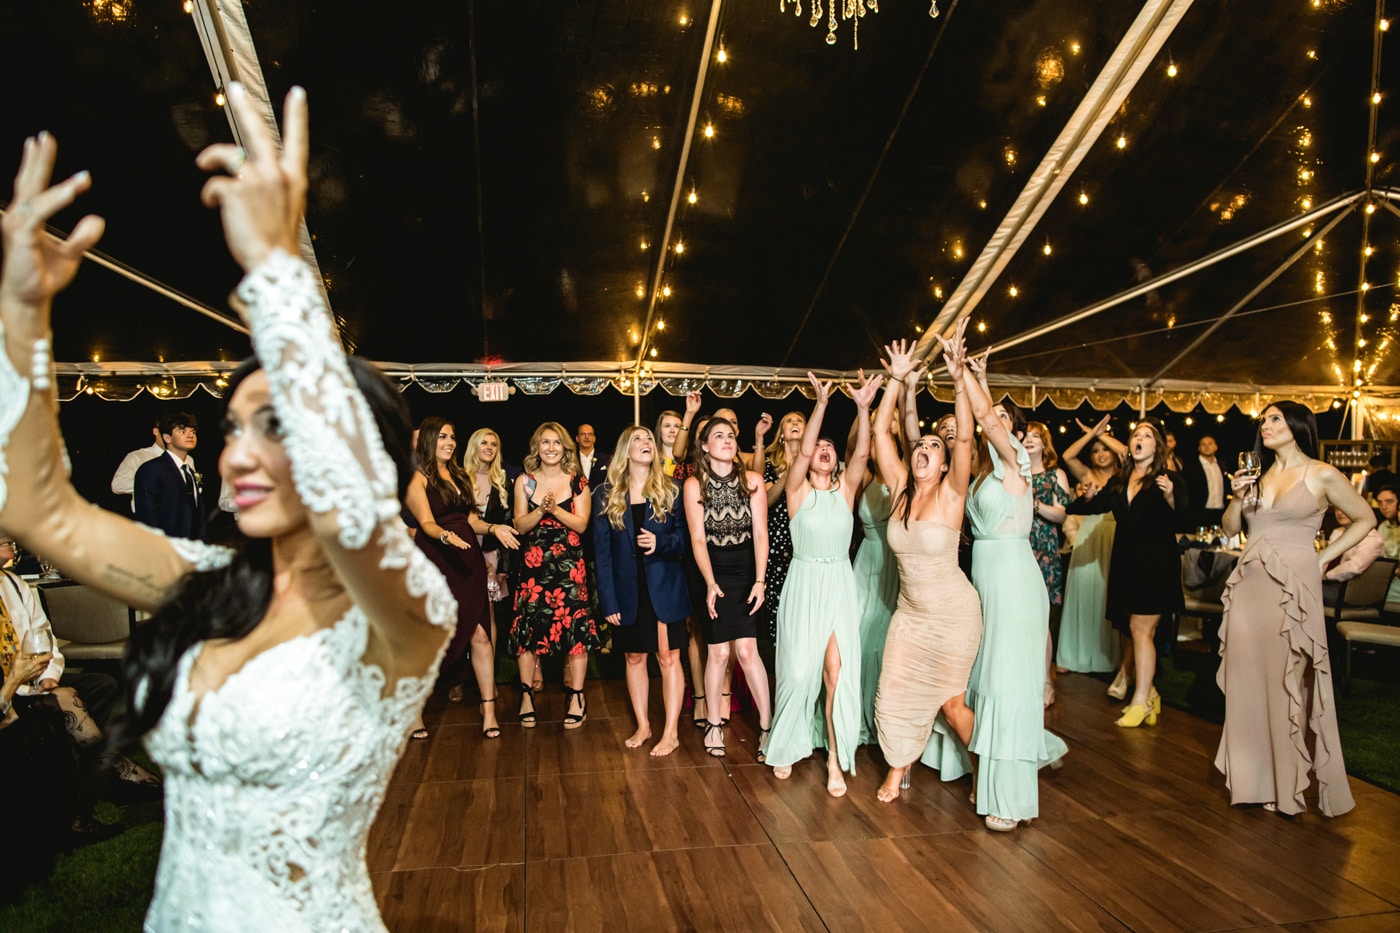 Bride tossing bouquet at reception